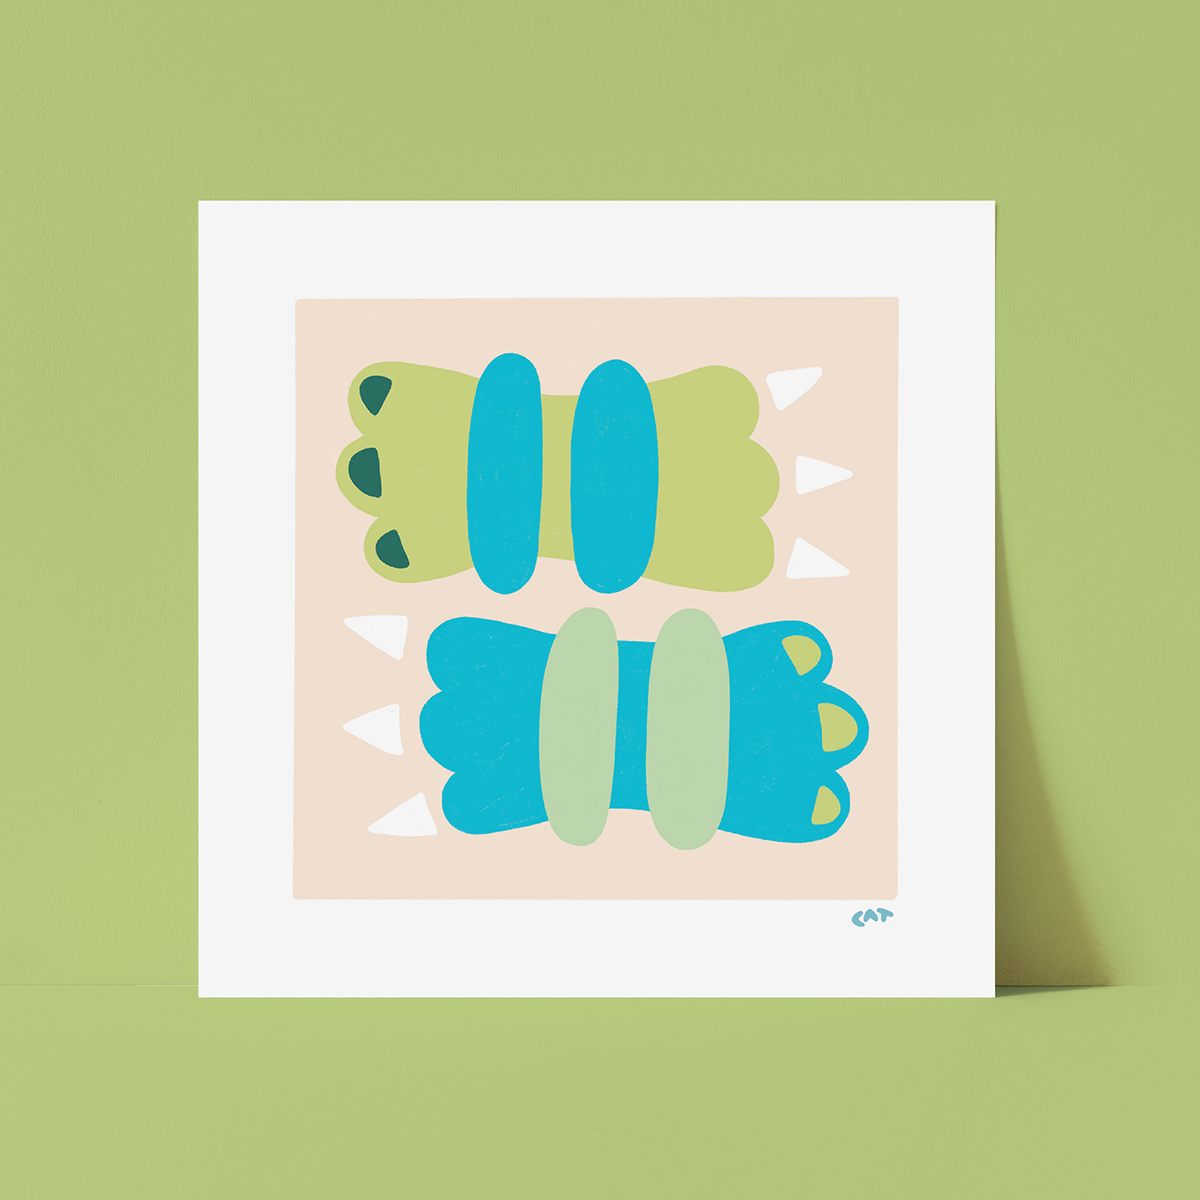 White unframed print of two claw like shapes in shades of green and blue. Each claw like shape has pointed white toenails and all the shapes sit on top of a beige square.